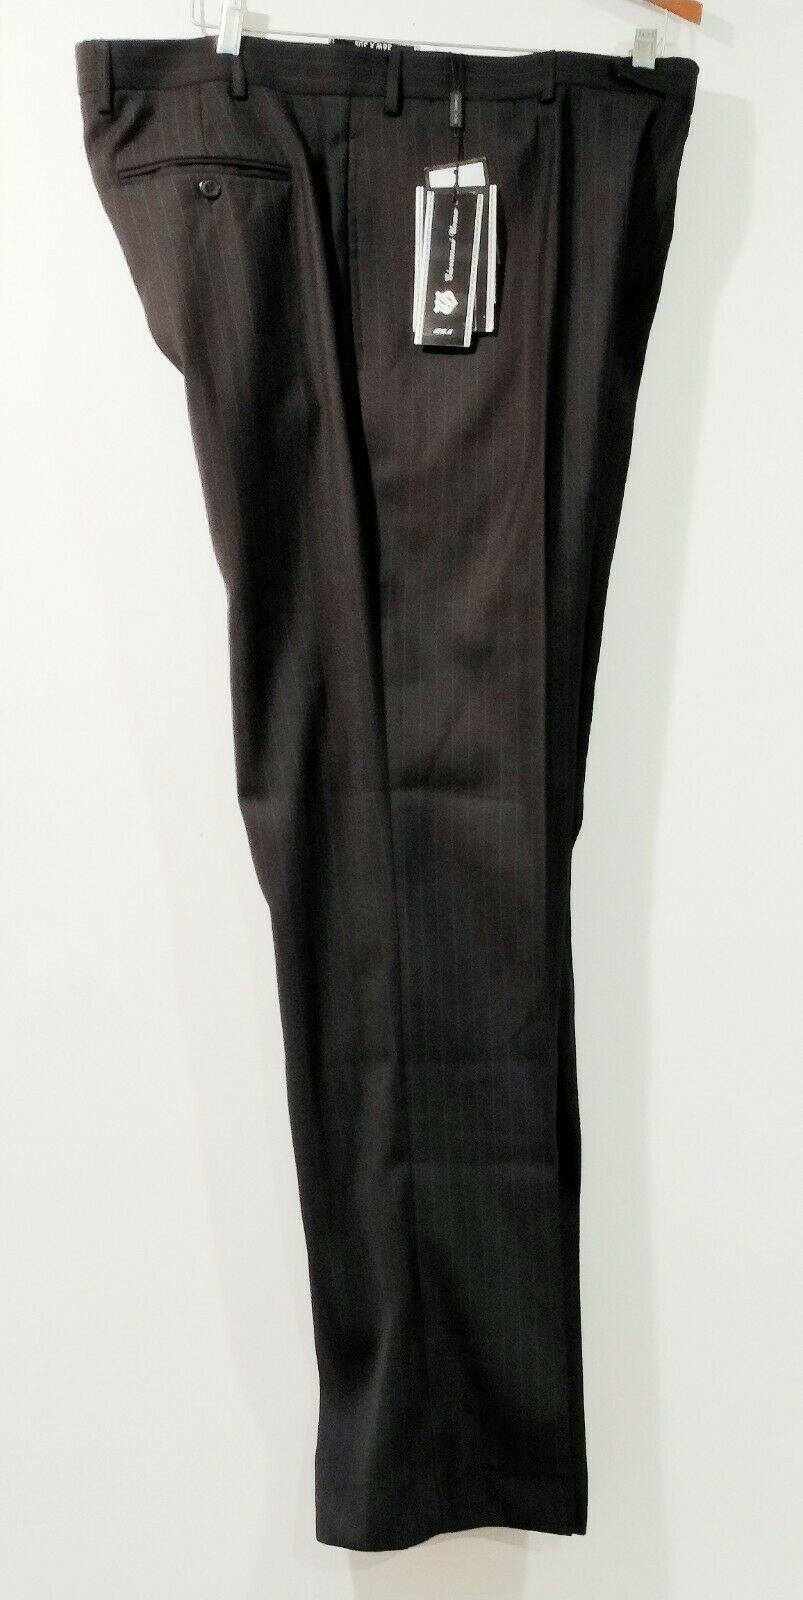 NWT Men Dress Pants by Signature Collection Size 21 / 31 inseam 34 3.4 Blac